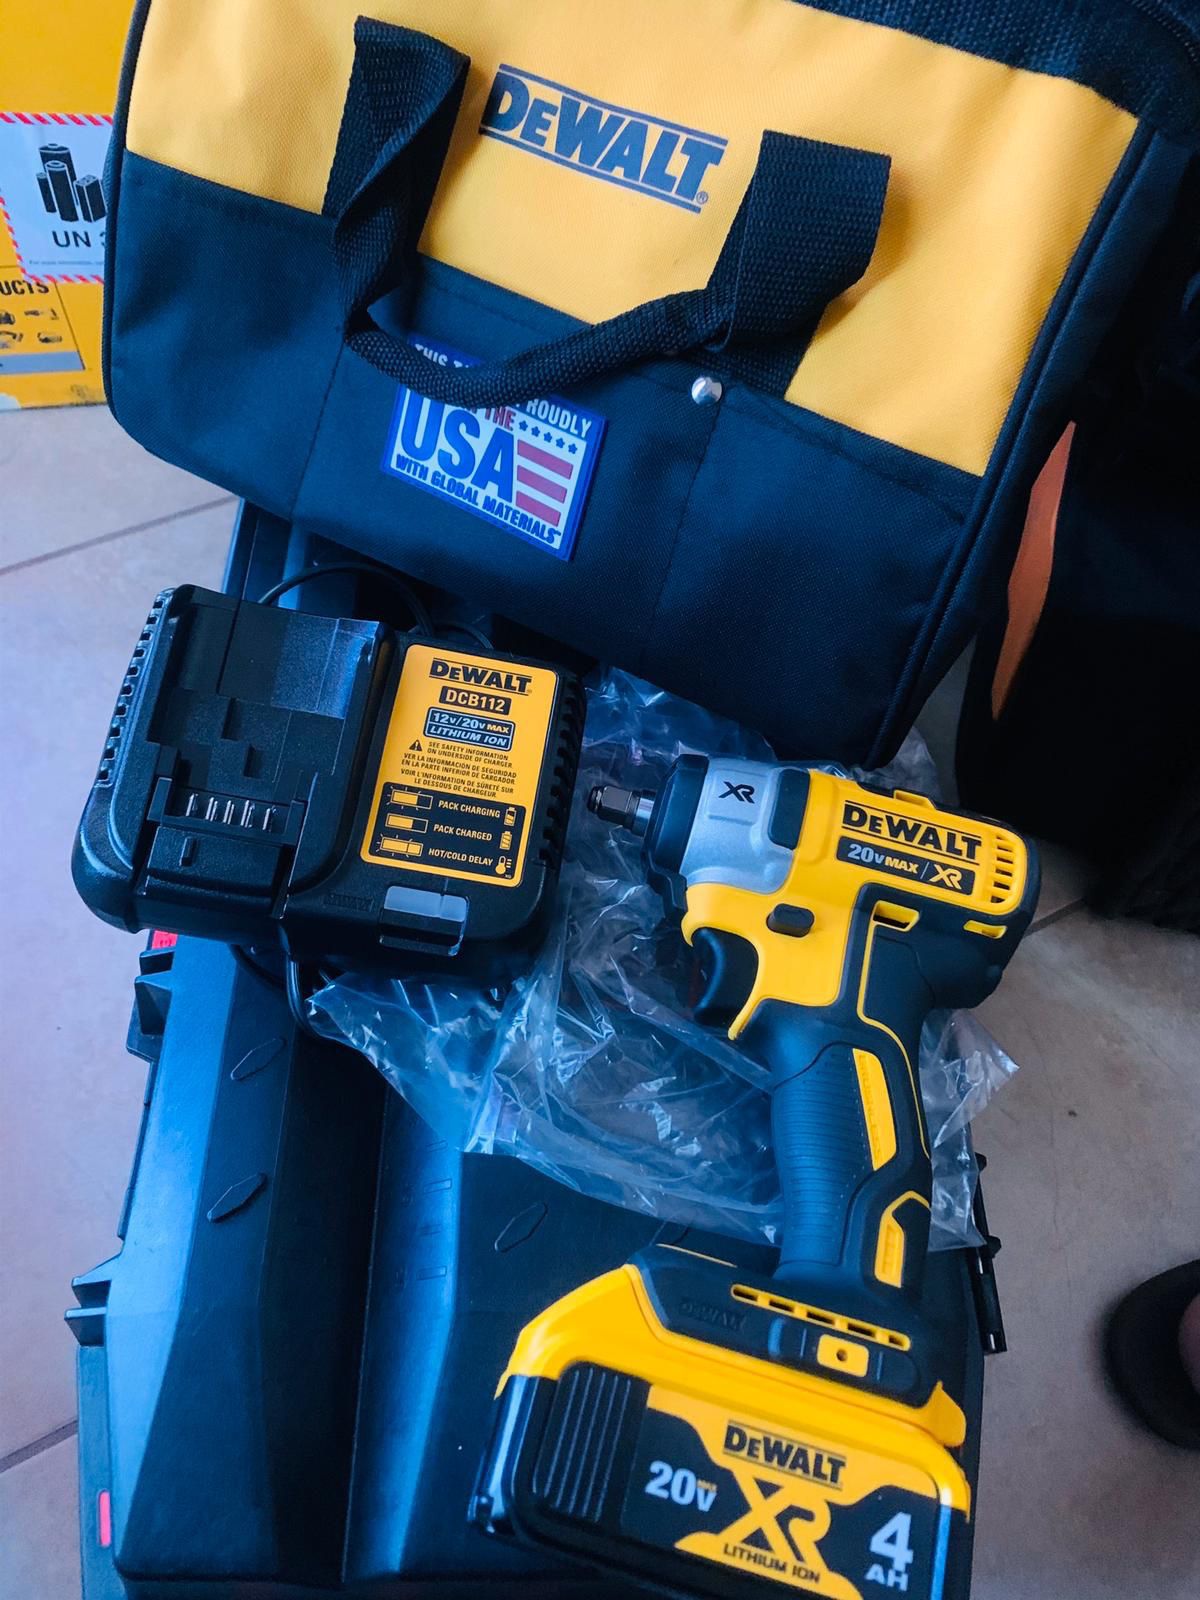 Dewalt xr brushless 3/8 impact with big 4ah battery charger and bag